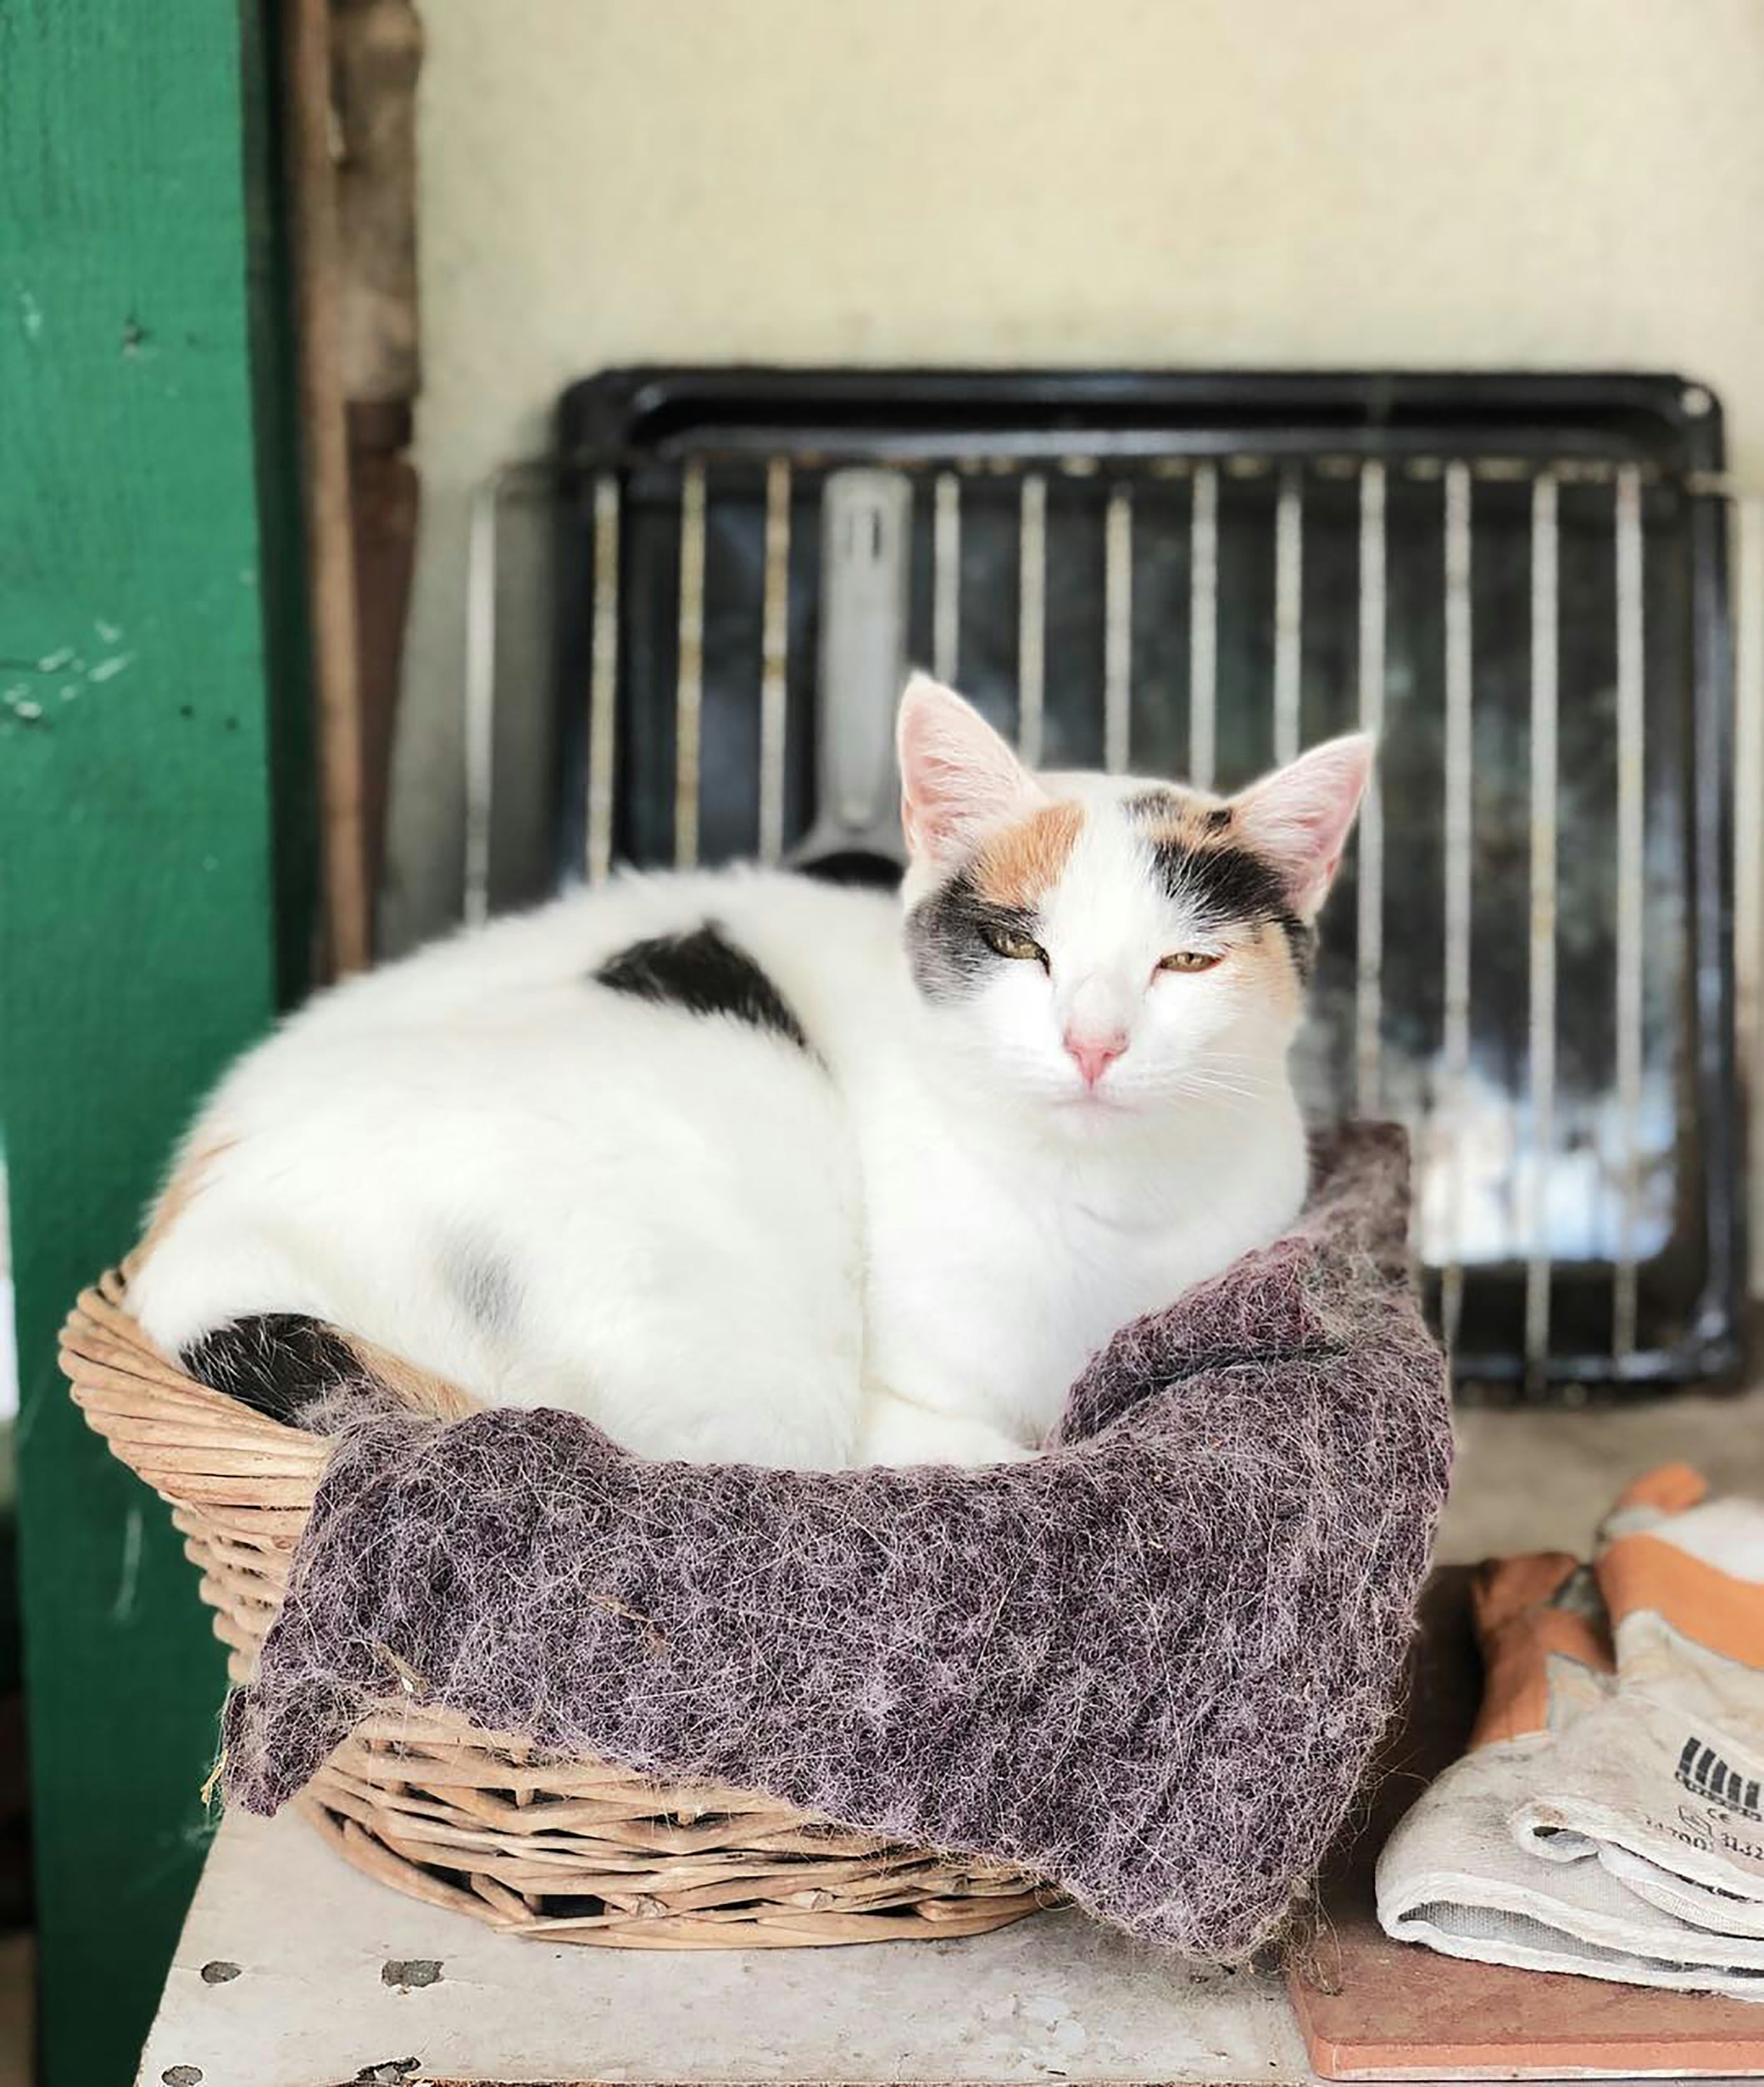 A sleepy cat cuddles up in a cozy basket in Ages, France.